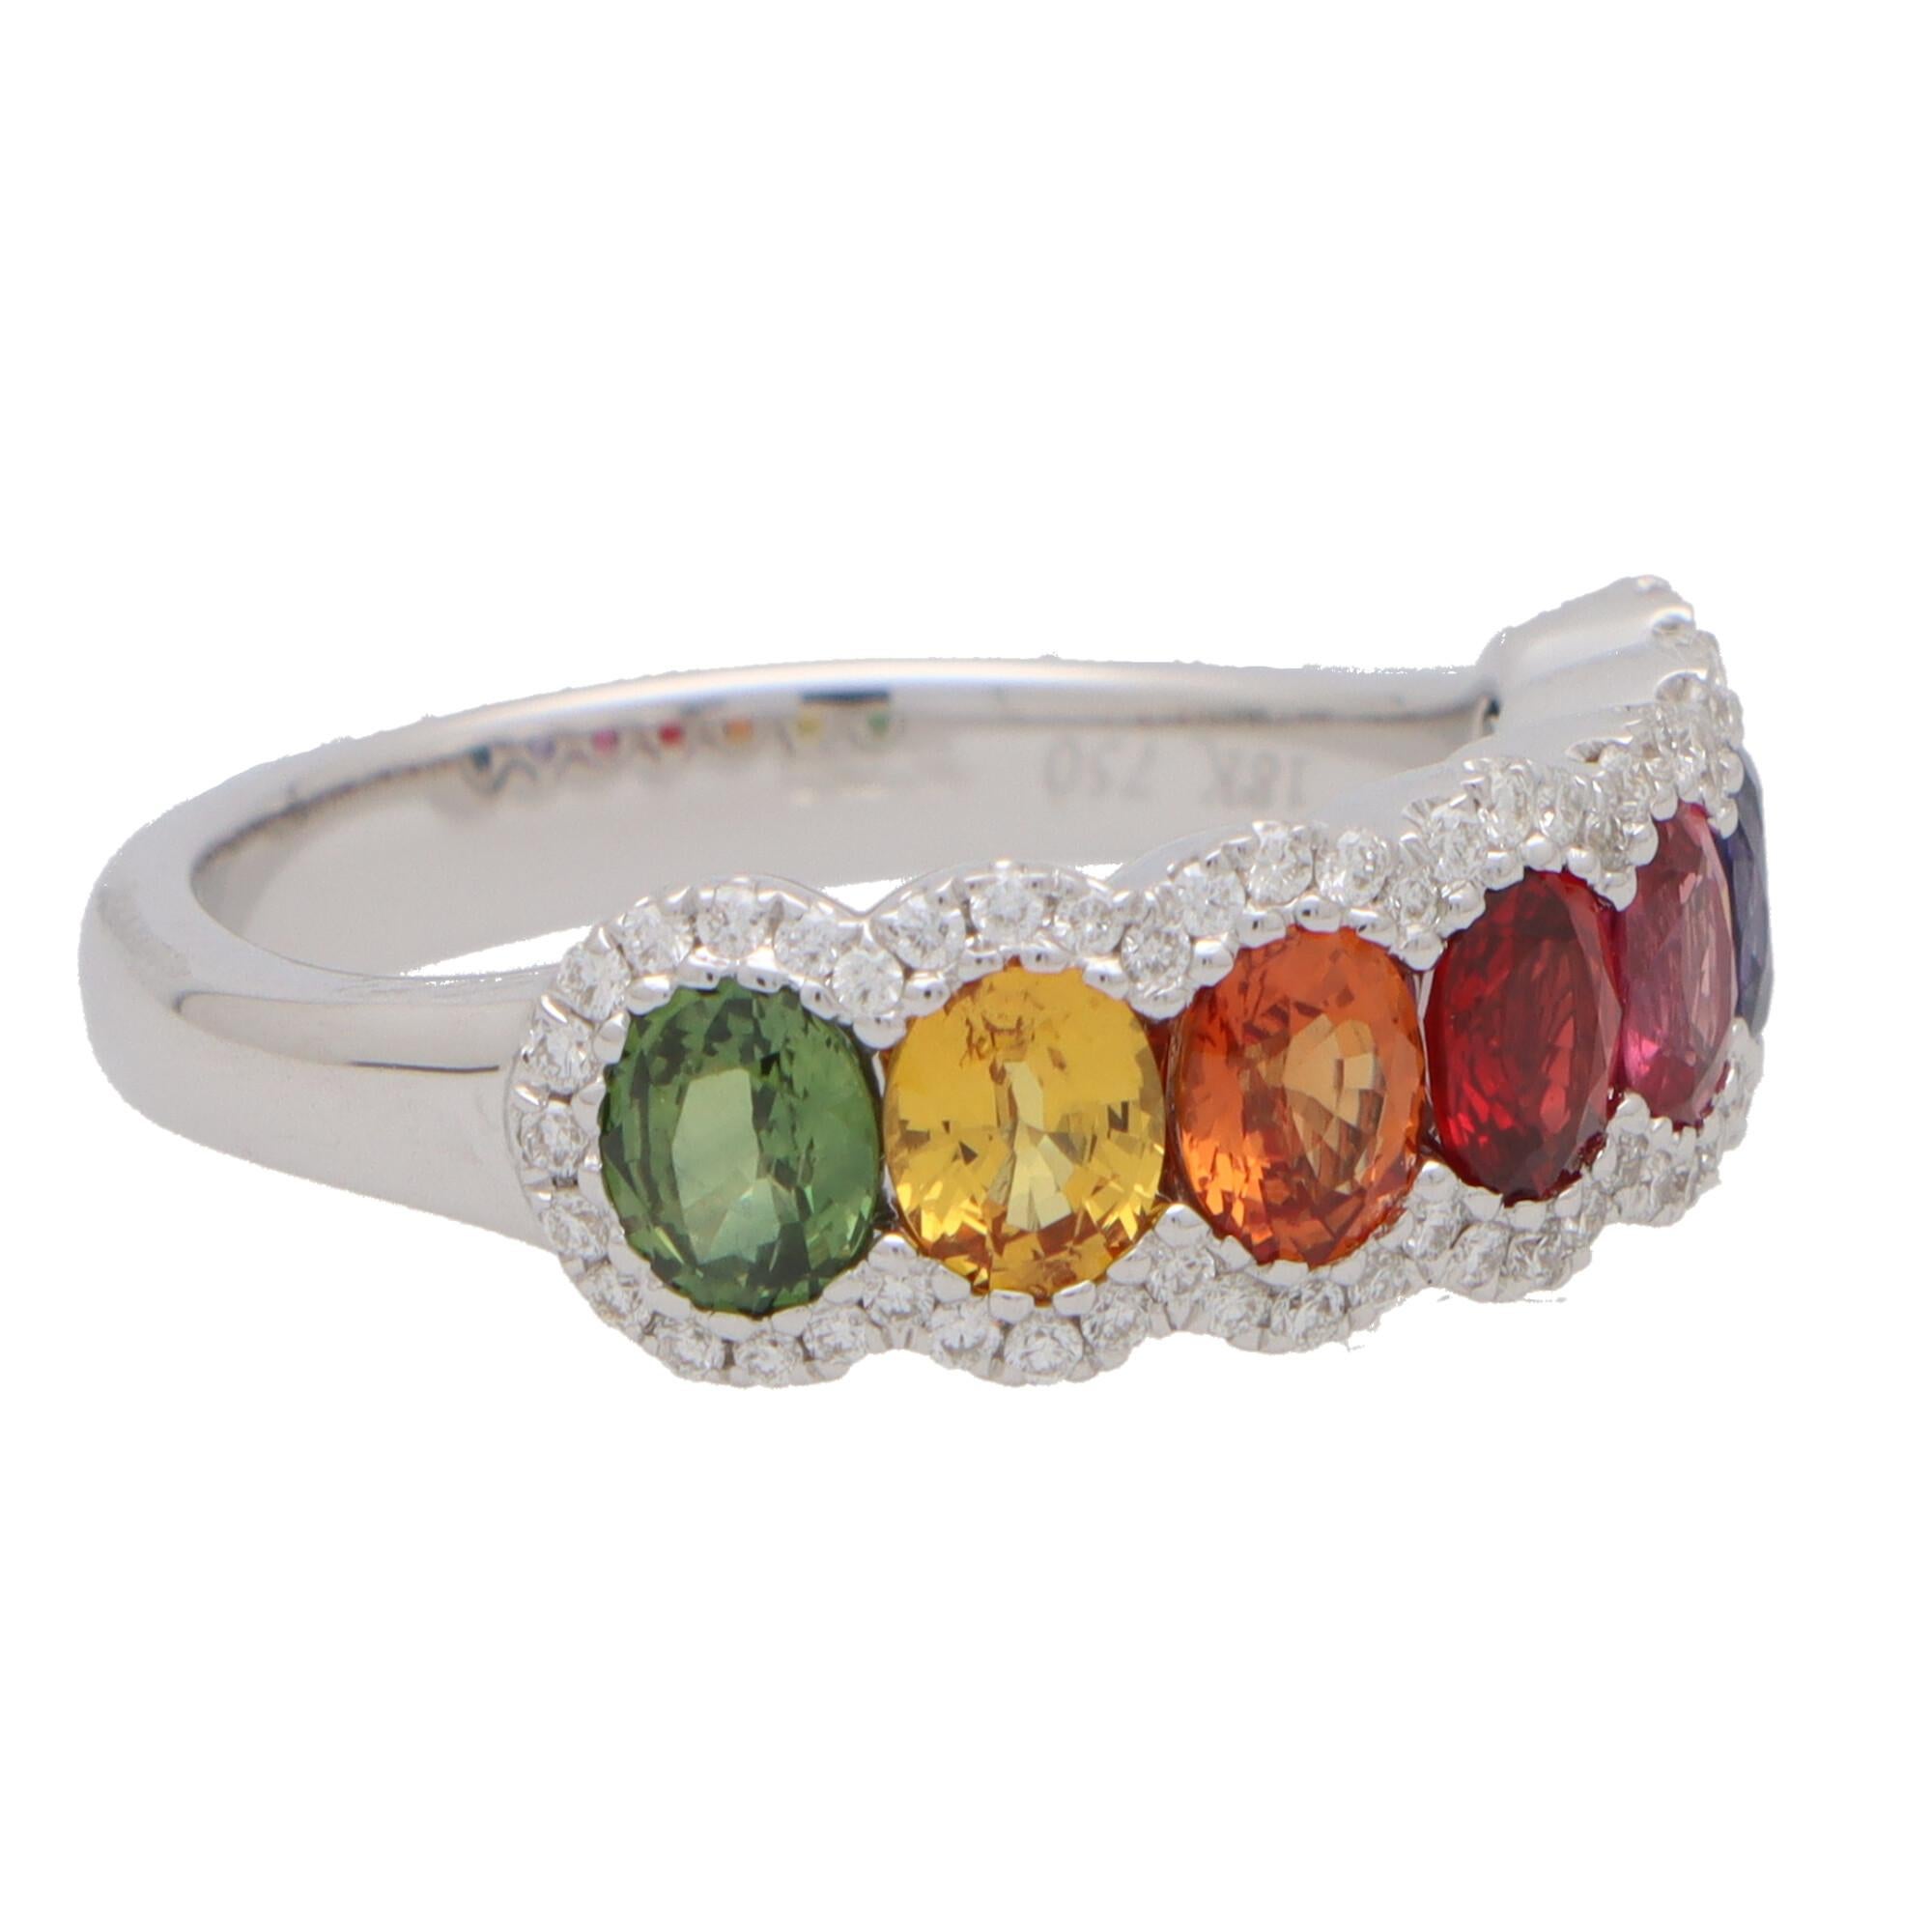 A beautiful rainbow sapphire and diamond half eternity ring set in 18k white gold.

The ring is firstly composed of seven oval cut sapphires that beautifully descend through the colour spectrum. The sapphires are securely micro-claw set and